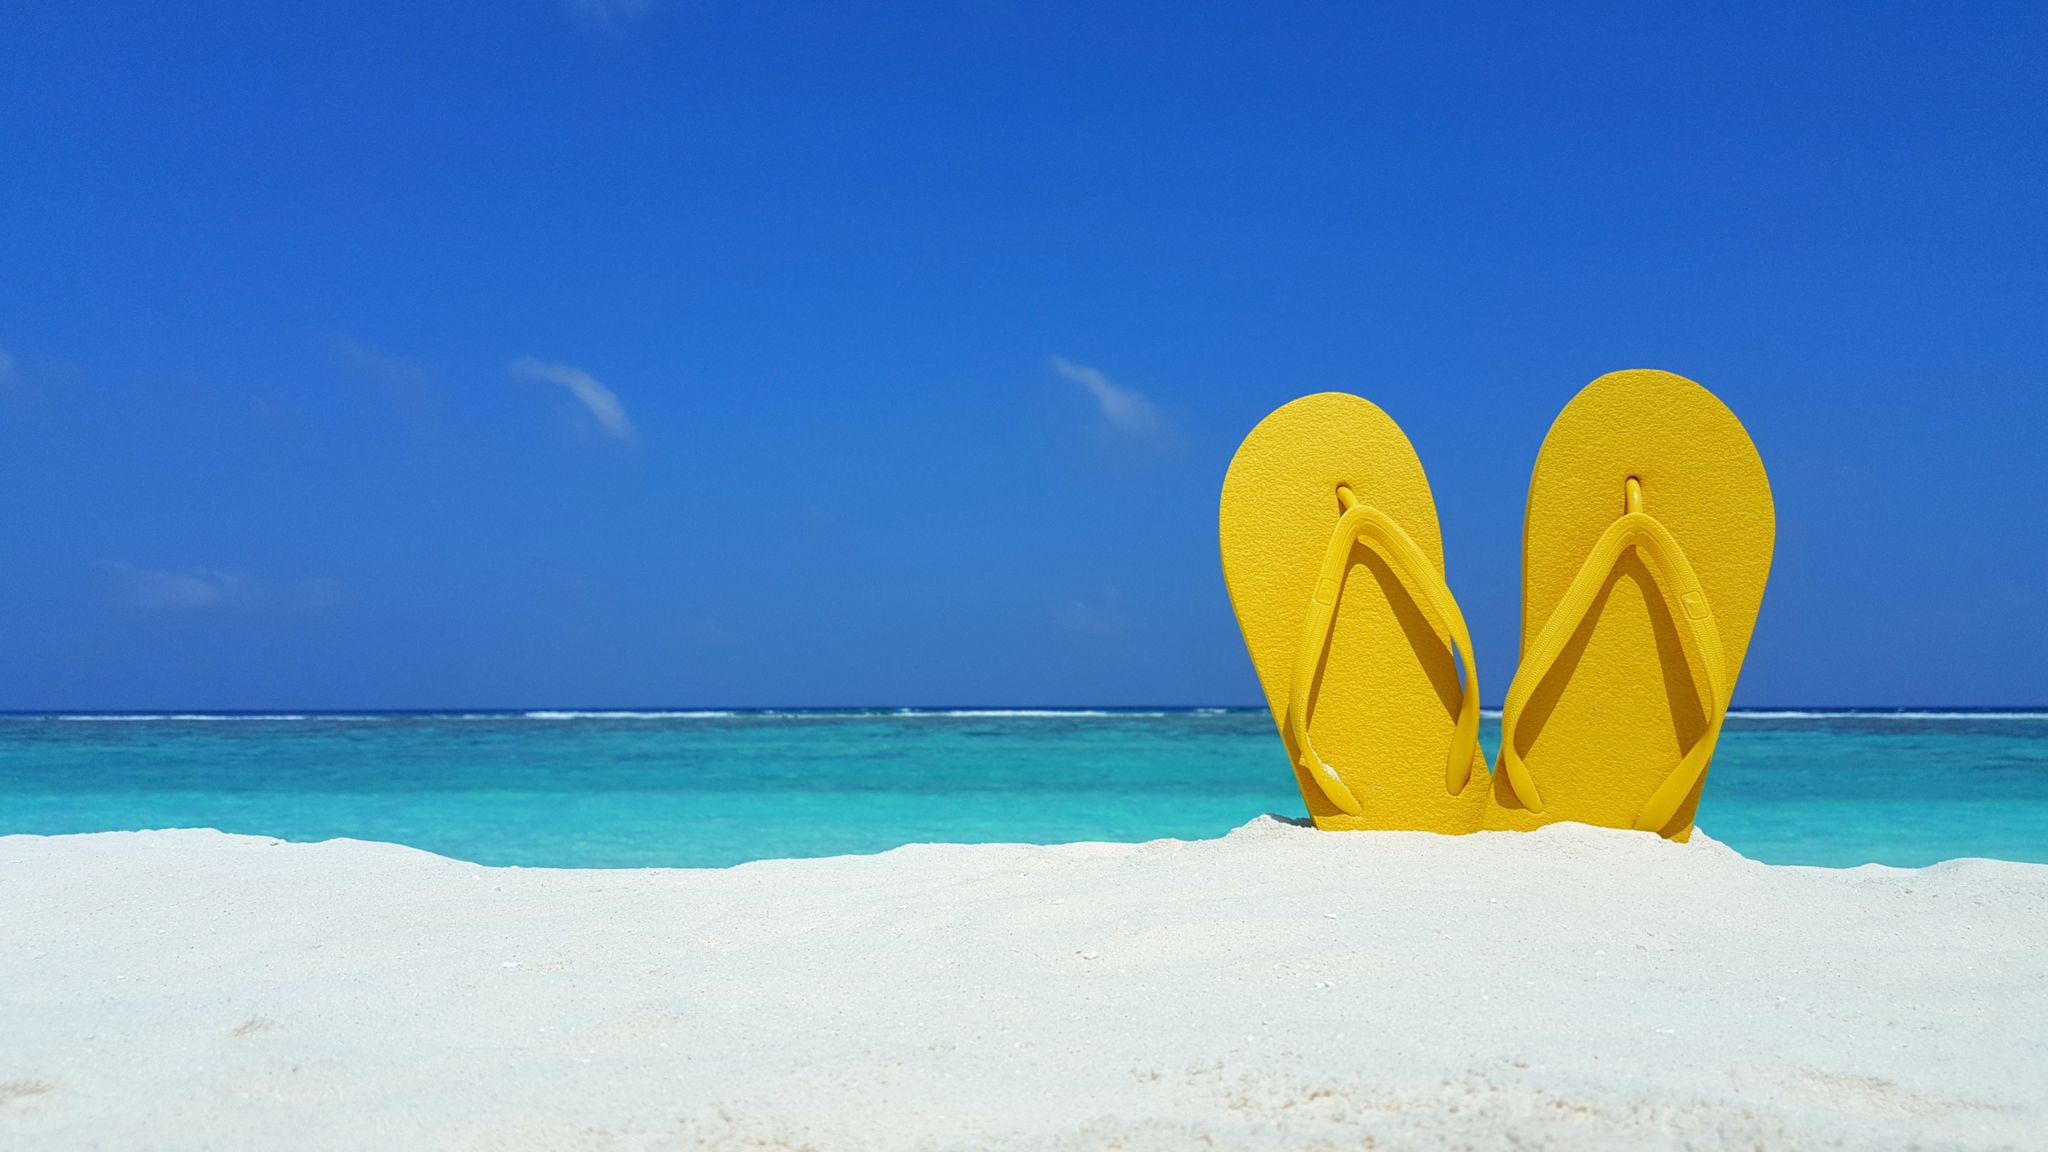 A pair of yellow flip-flops protrude from the sand on a sunny beach, with a blue sky in the background